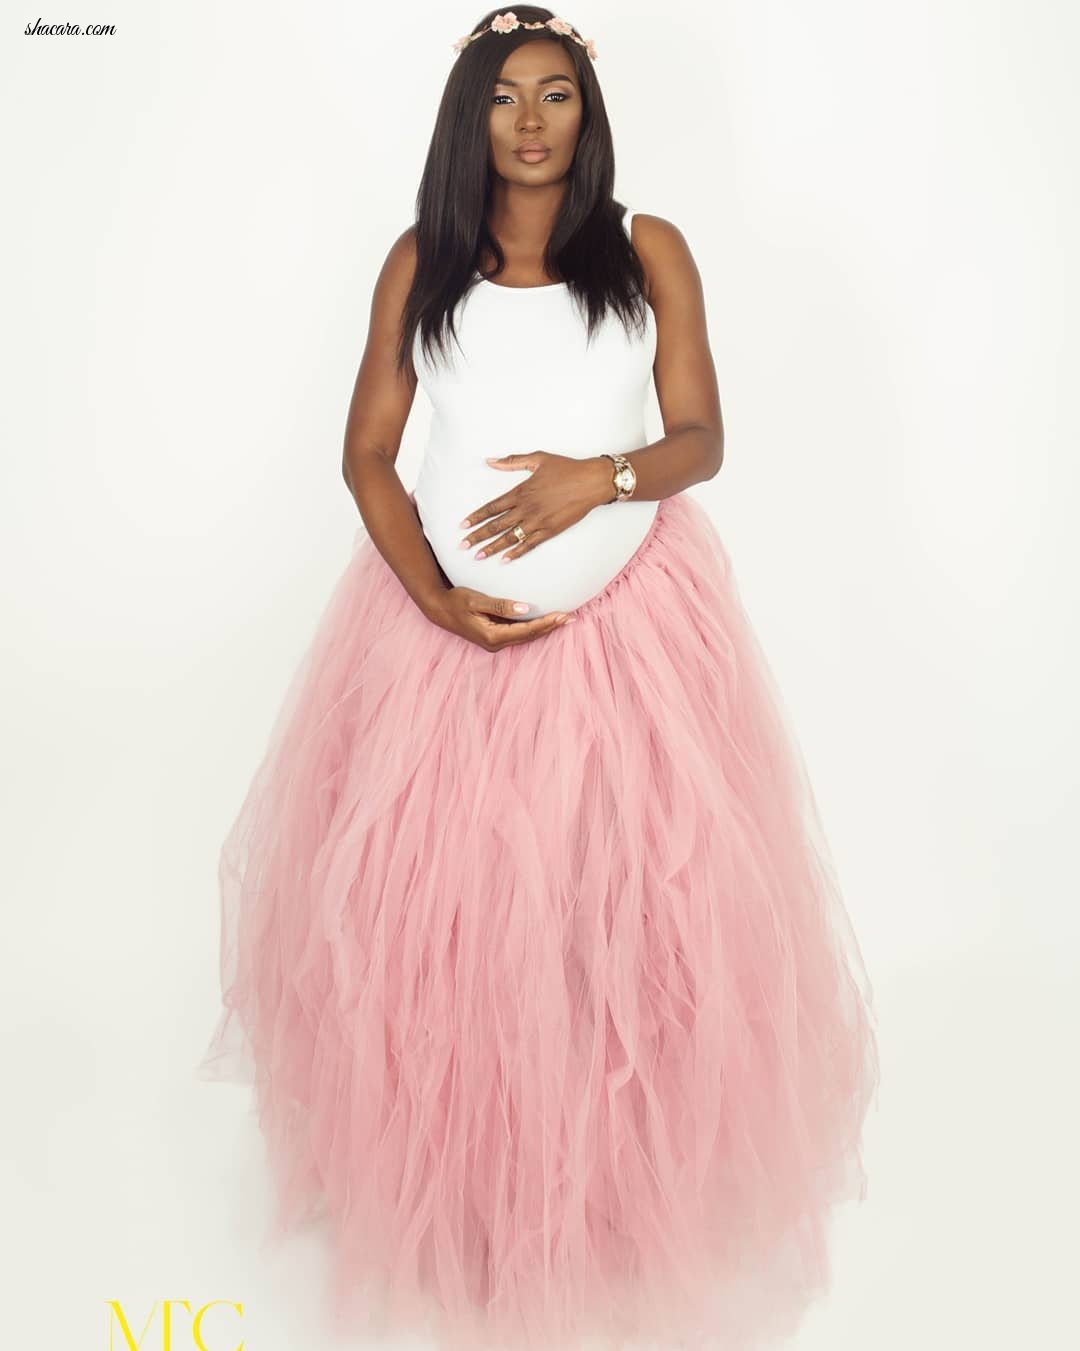 Comedian Wale Gates, Wife Lanre Welcome Baby Girl & Release Beautiful Maternity Photos